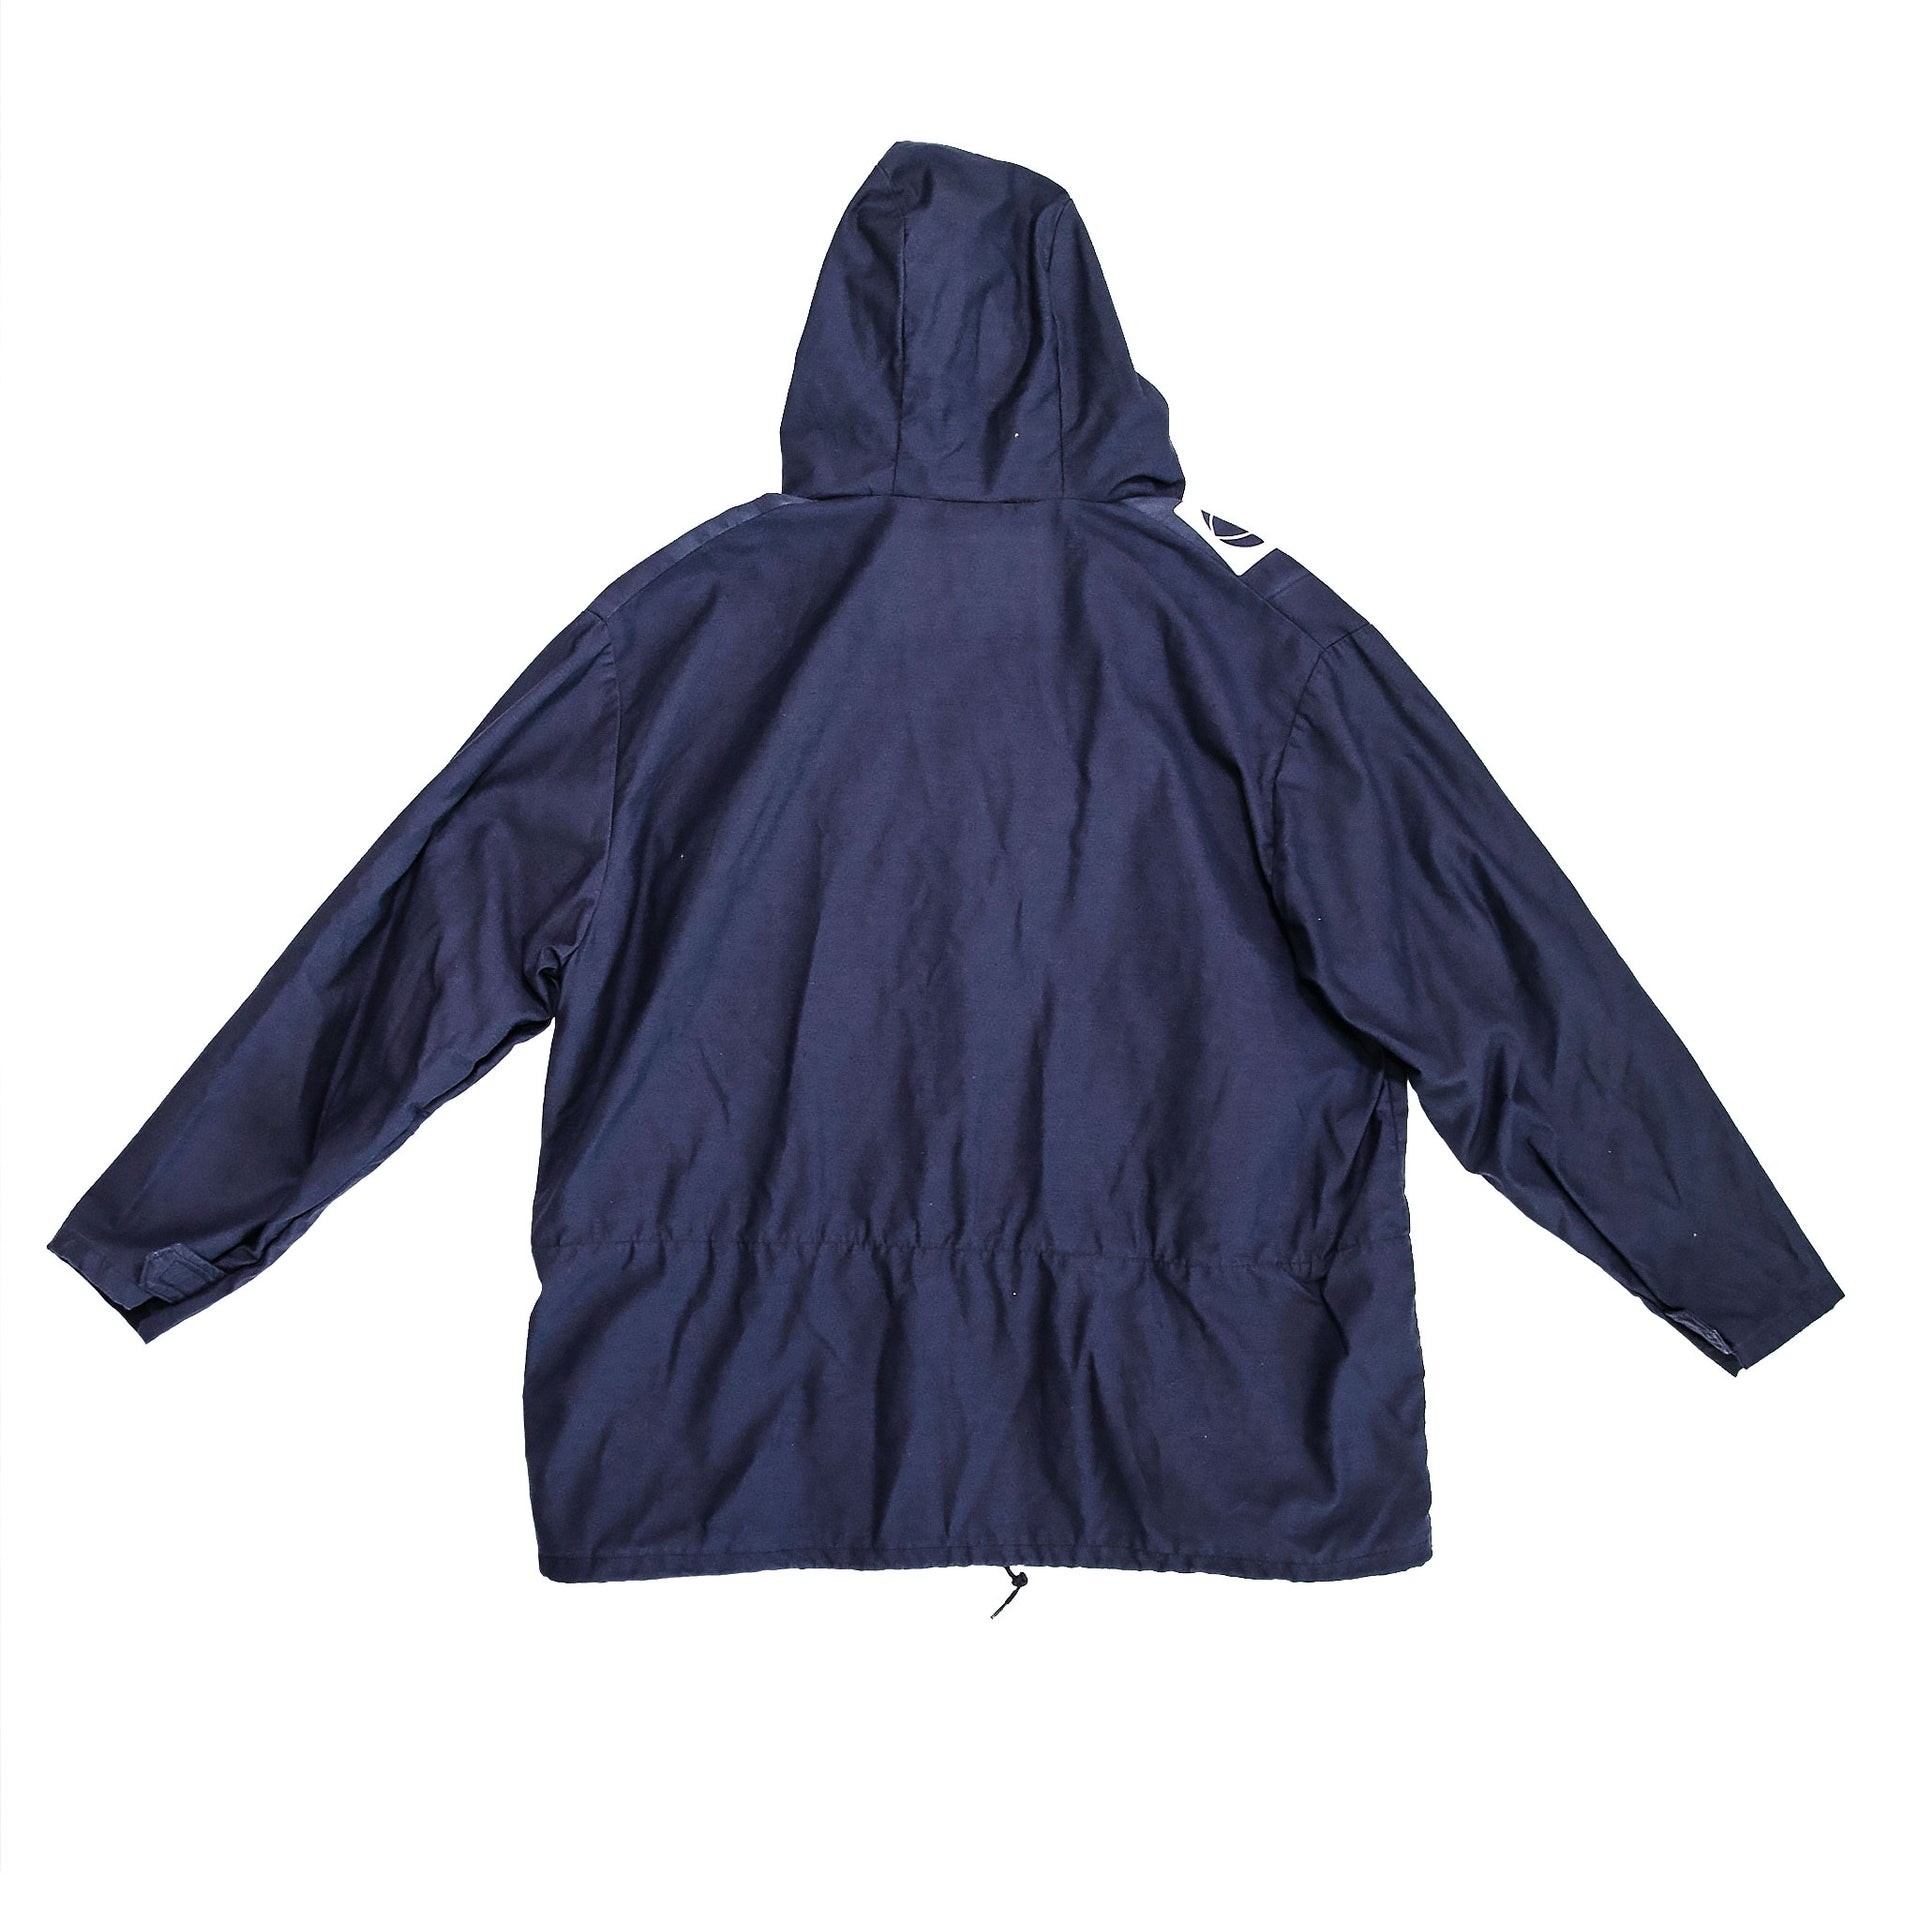 ASIF Hooded Anorack-Navy – ASIF (as seen in the future)